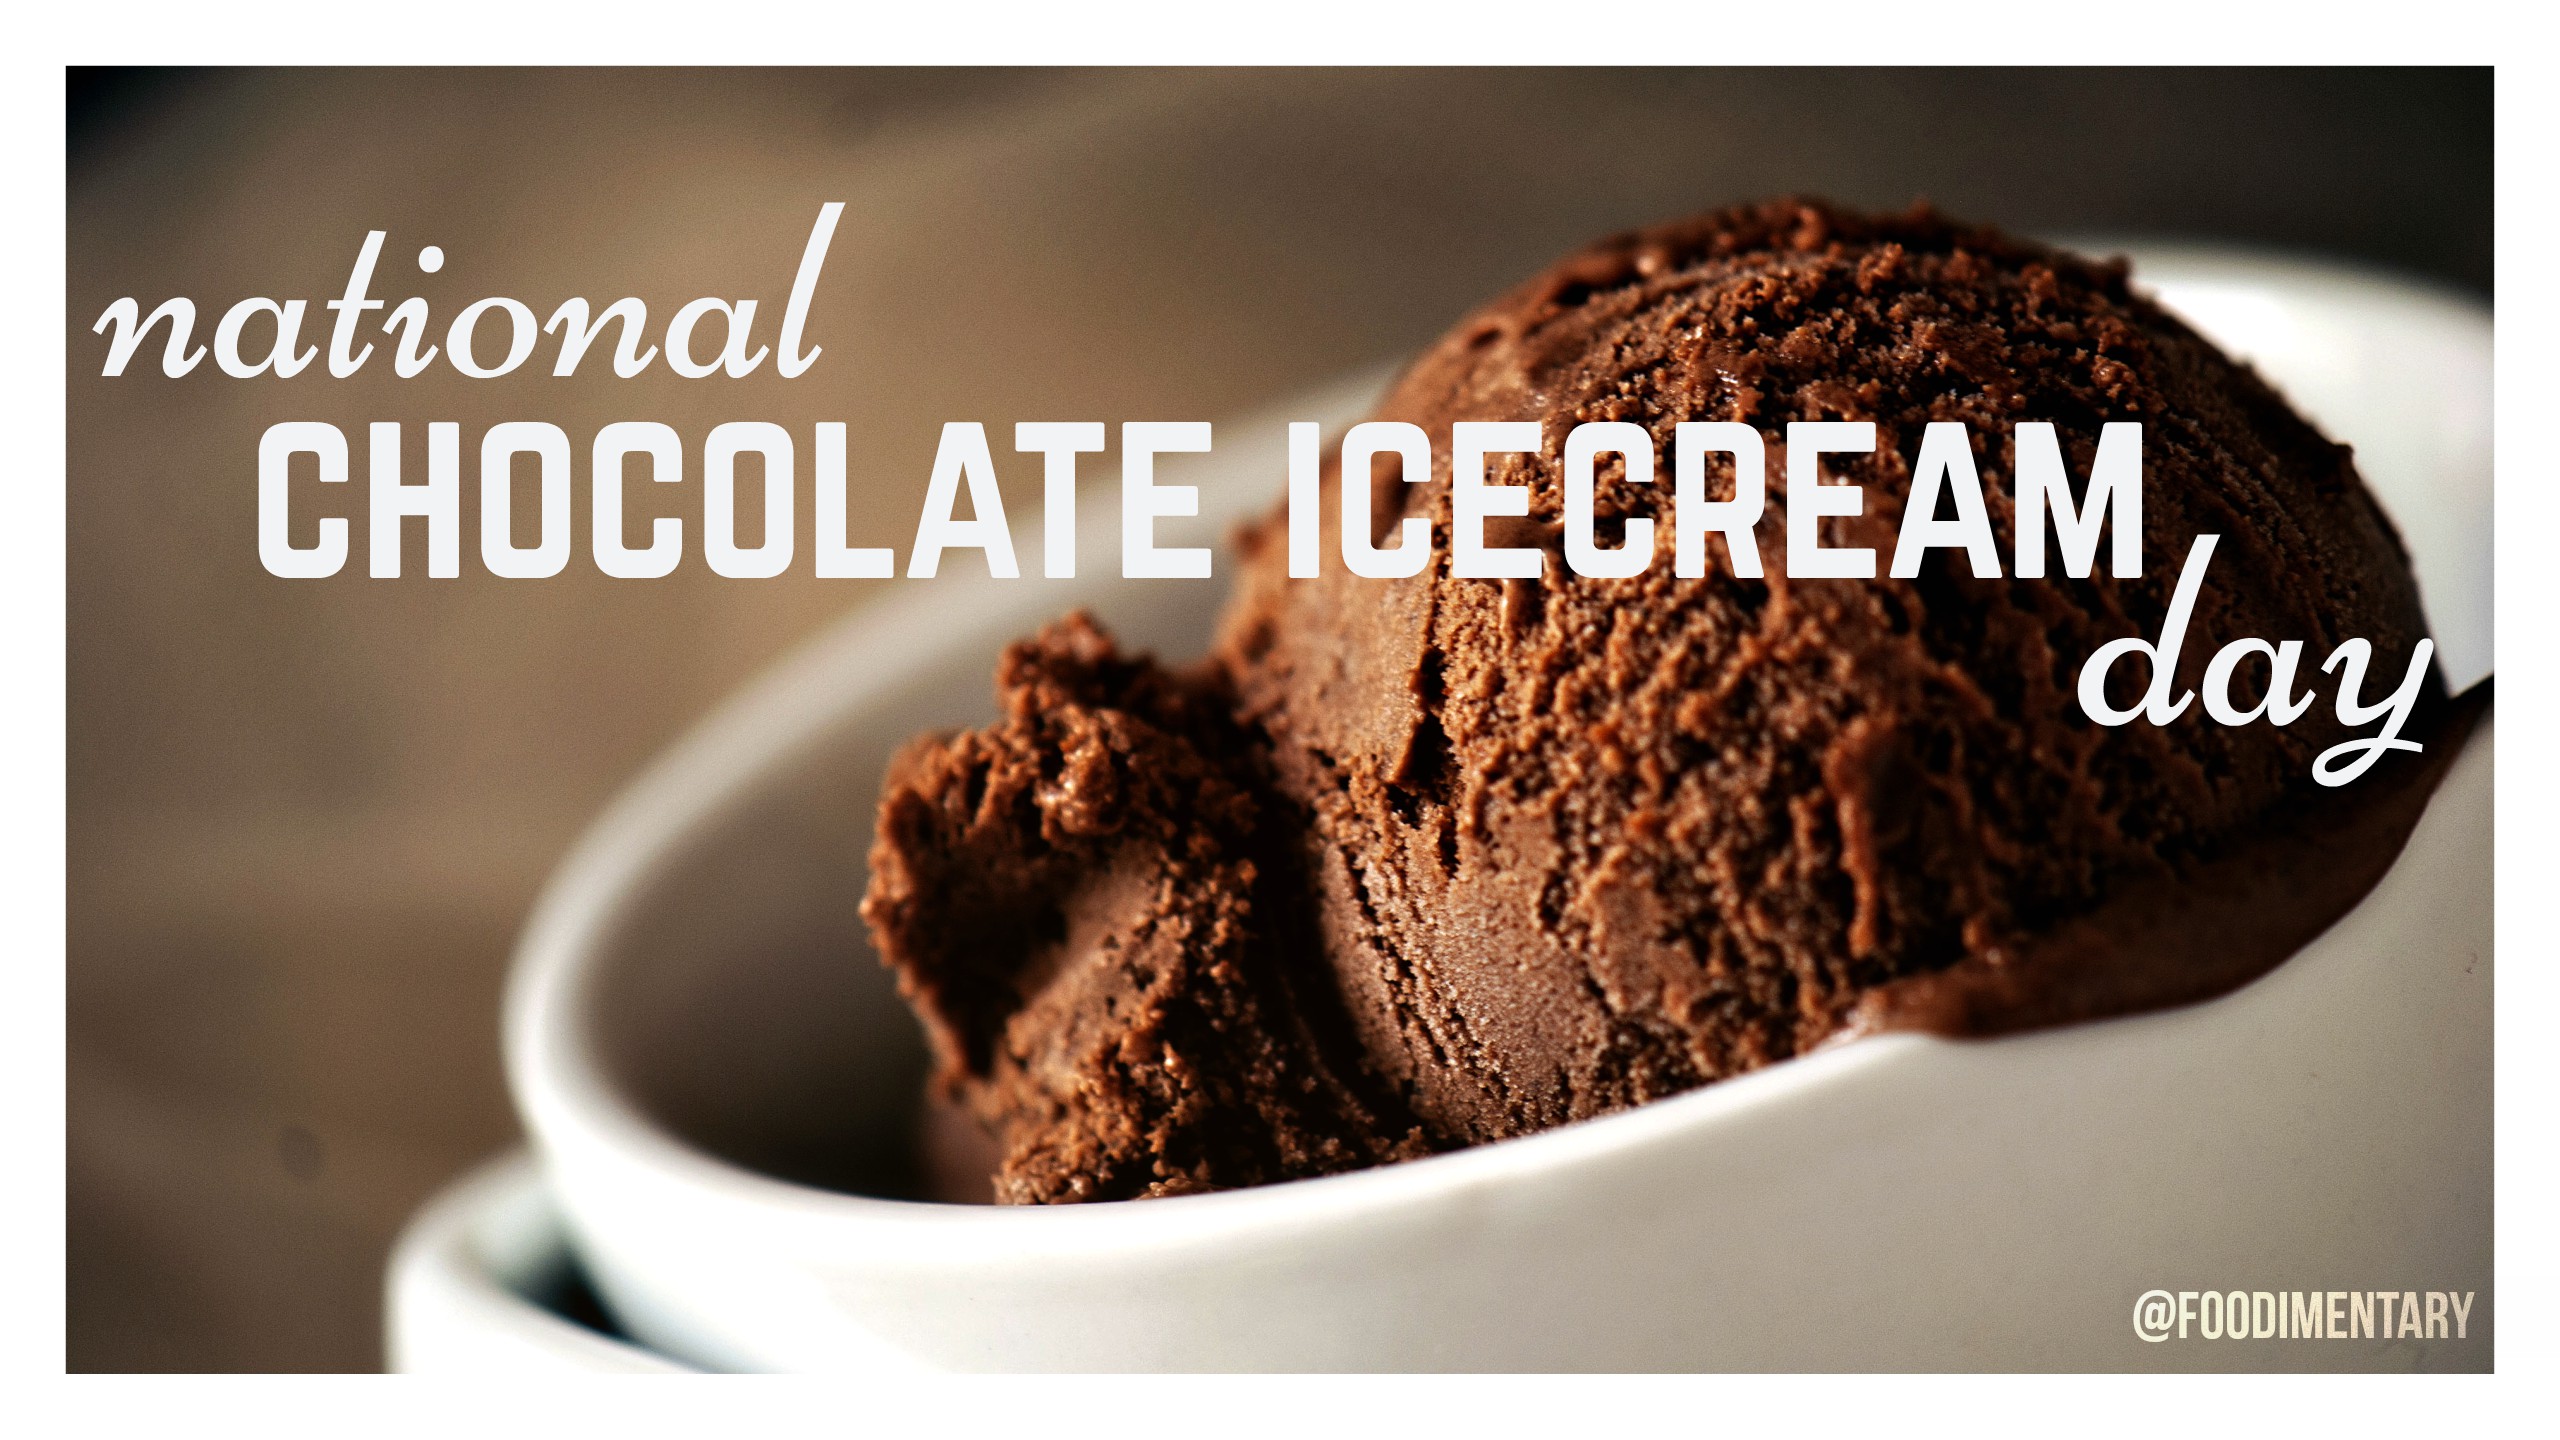 National Chocolate Ice Cream Day - June 7th!!! Cover Photo